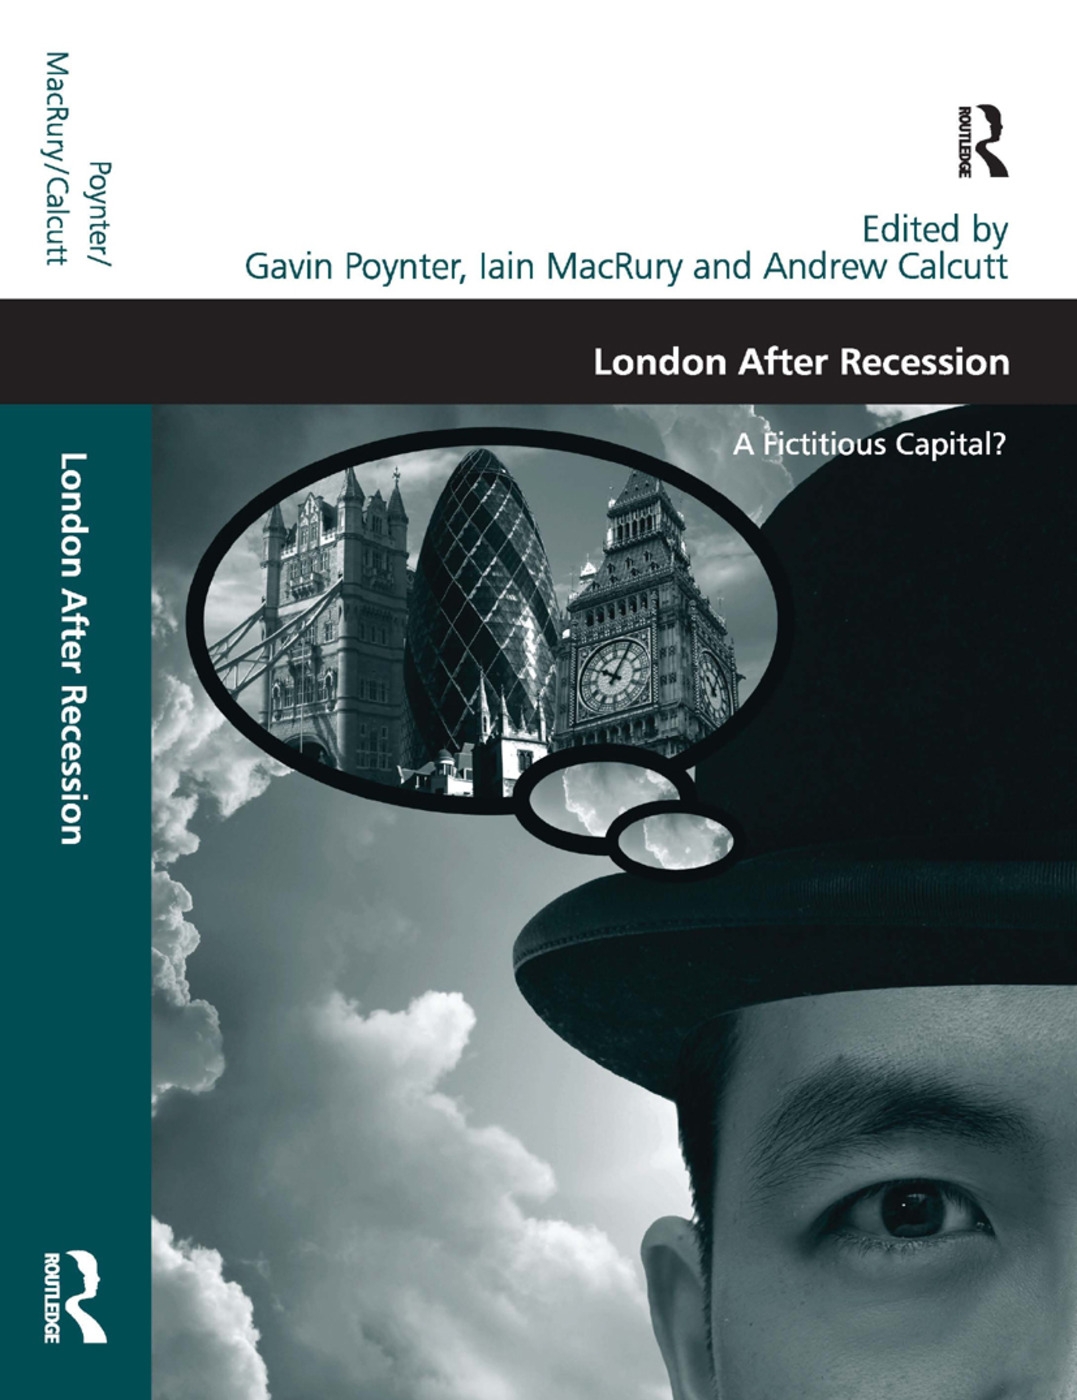 London After Recession: A Fictitious Capital?. Edited by Gavin Poynter, Iain Macrury and Andrew Calcutt